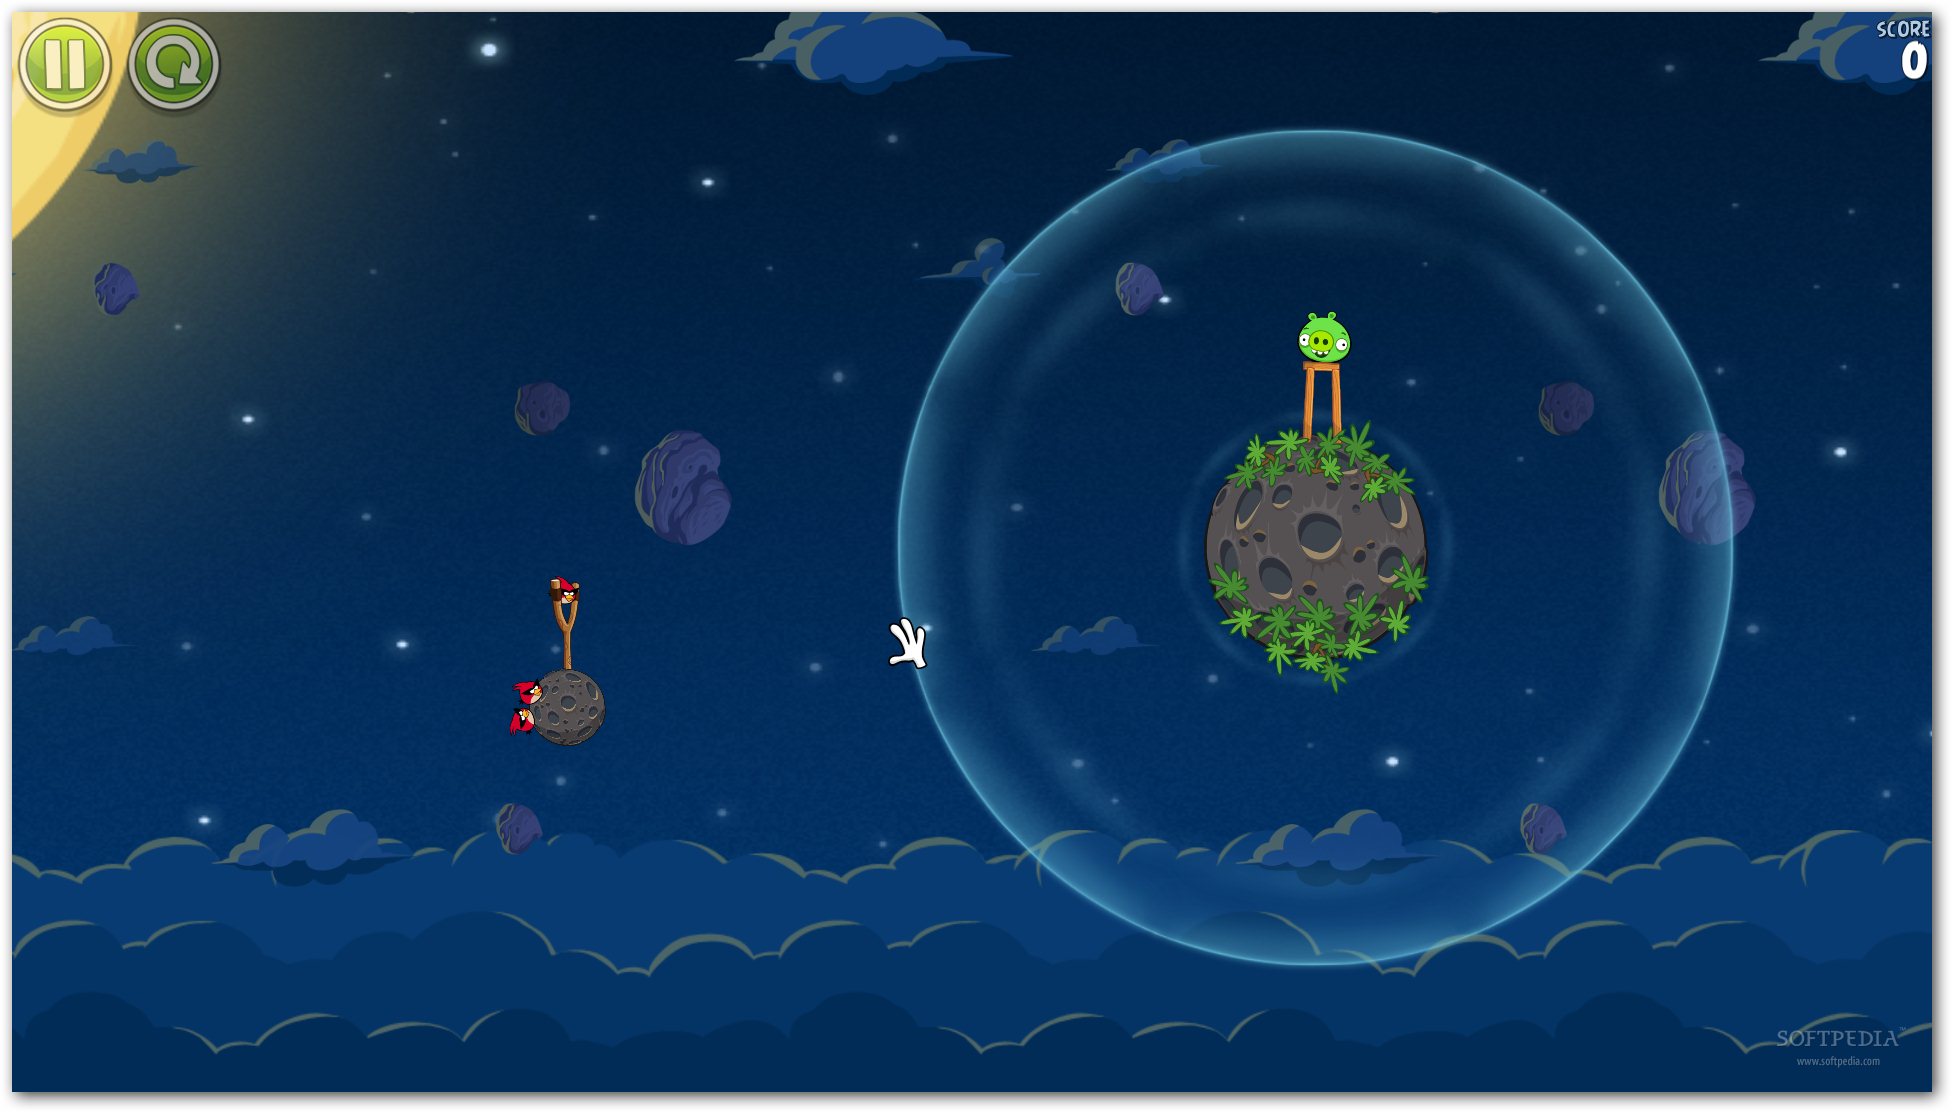 angry birds space download